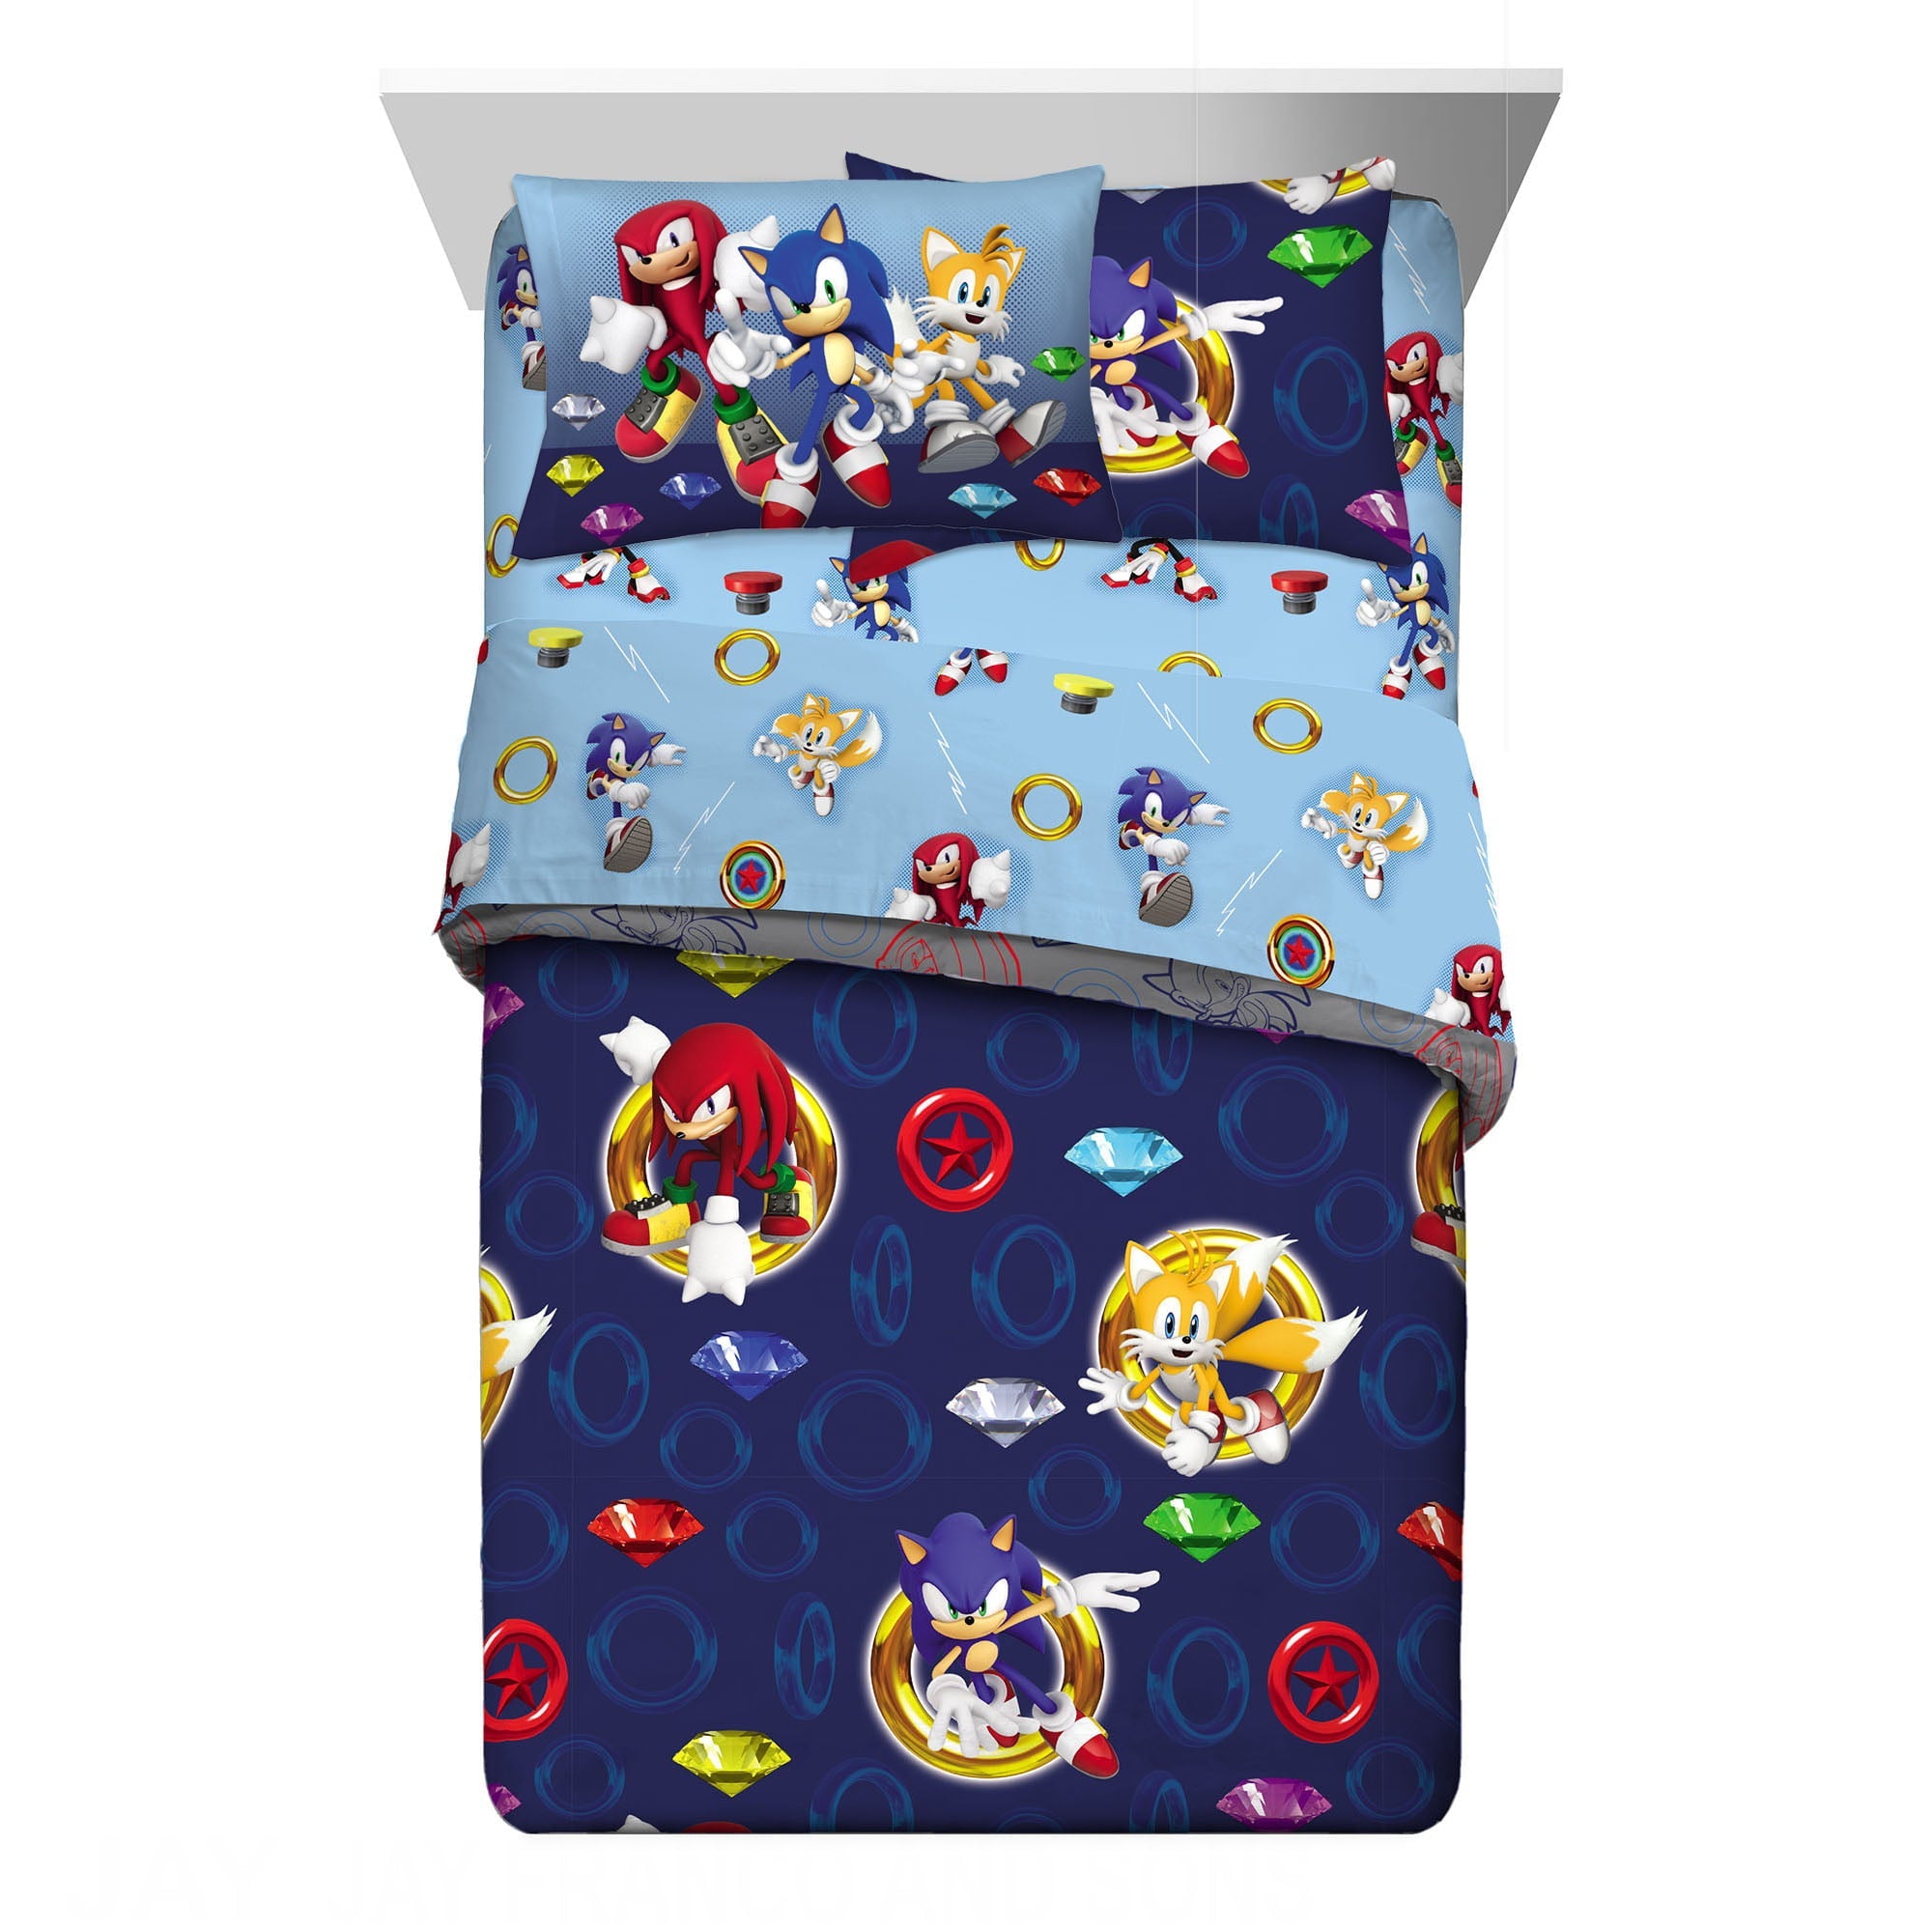 Sonic the Hedgehog Kids Full Bed in a Bag, Gaming Bedding, Comforter Sheets and Sham, Blue